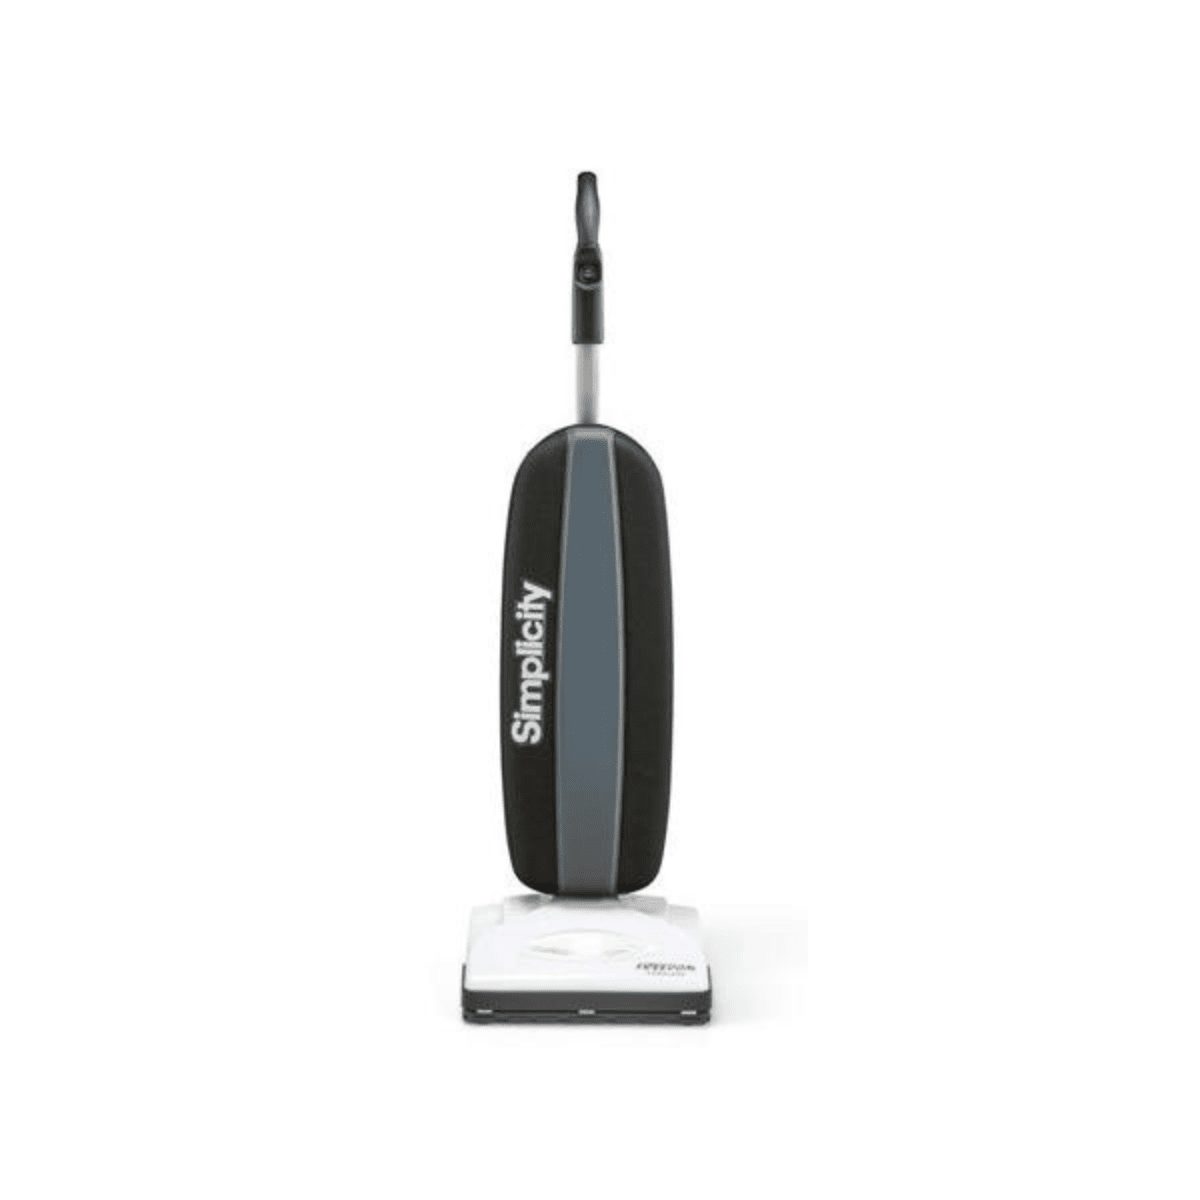 Simplicity S10CV comes with the powerful vacuum